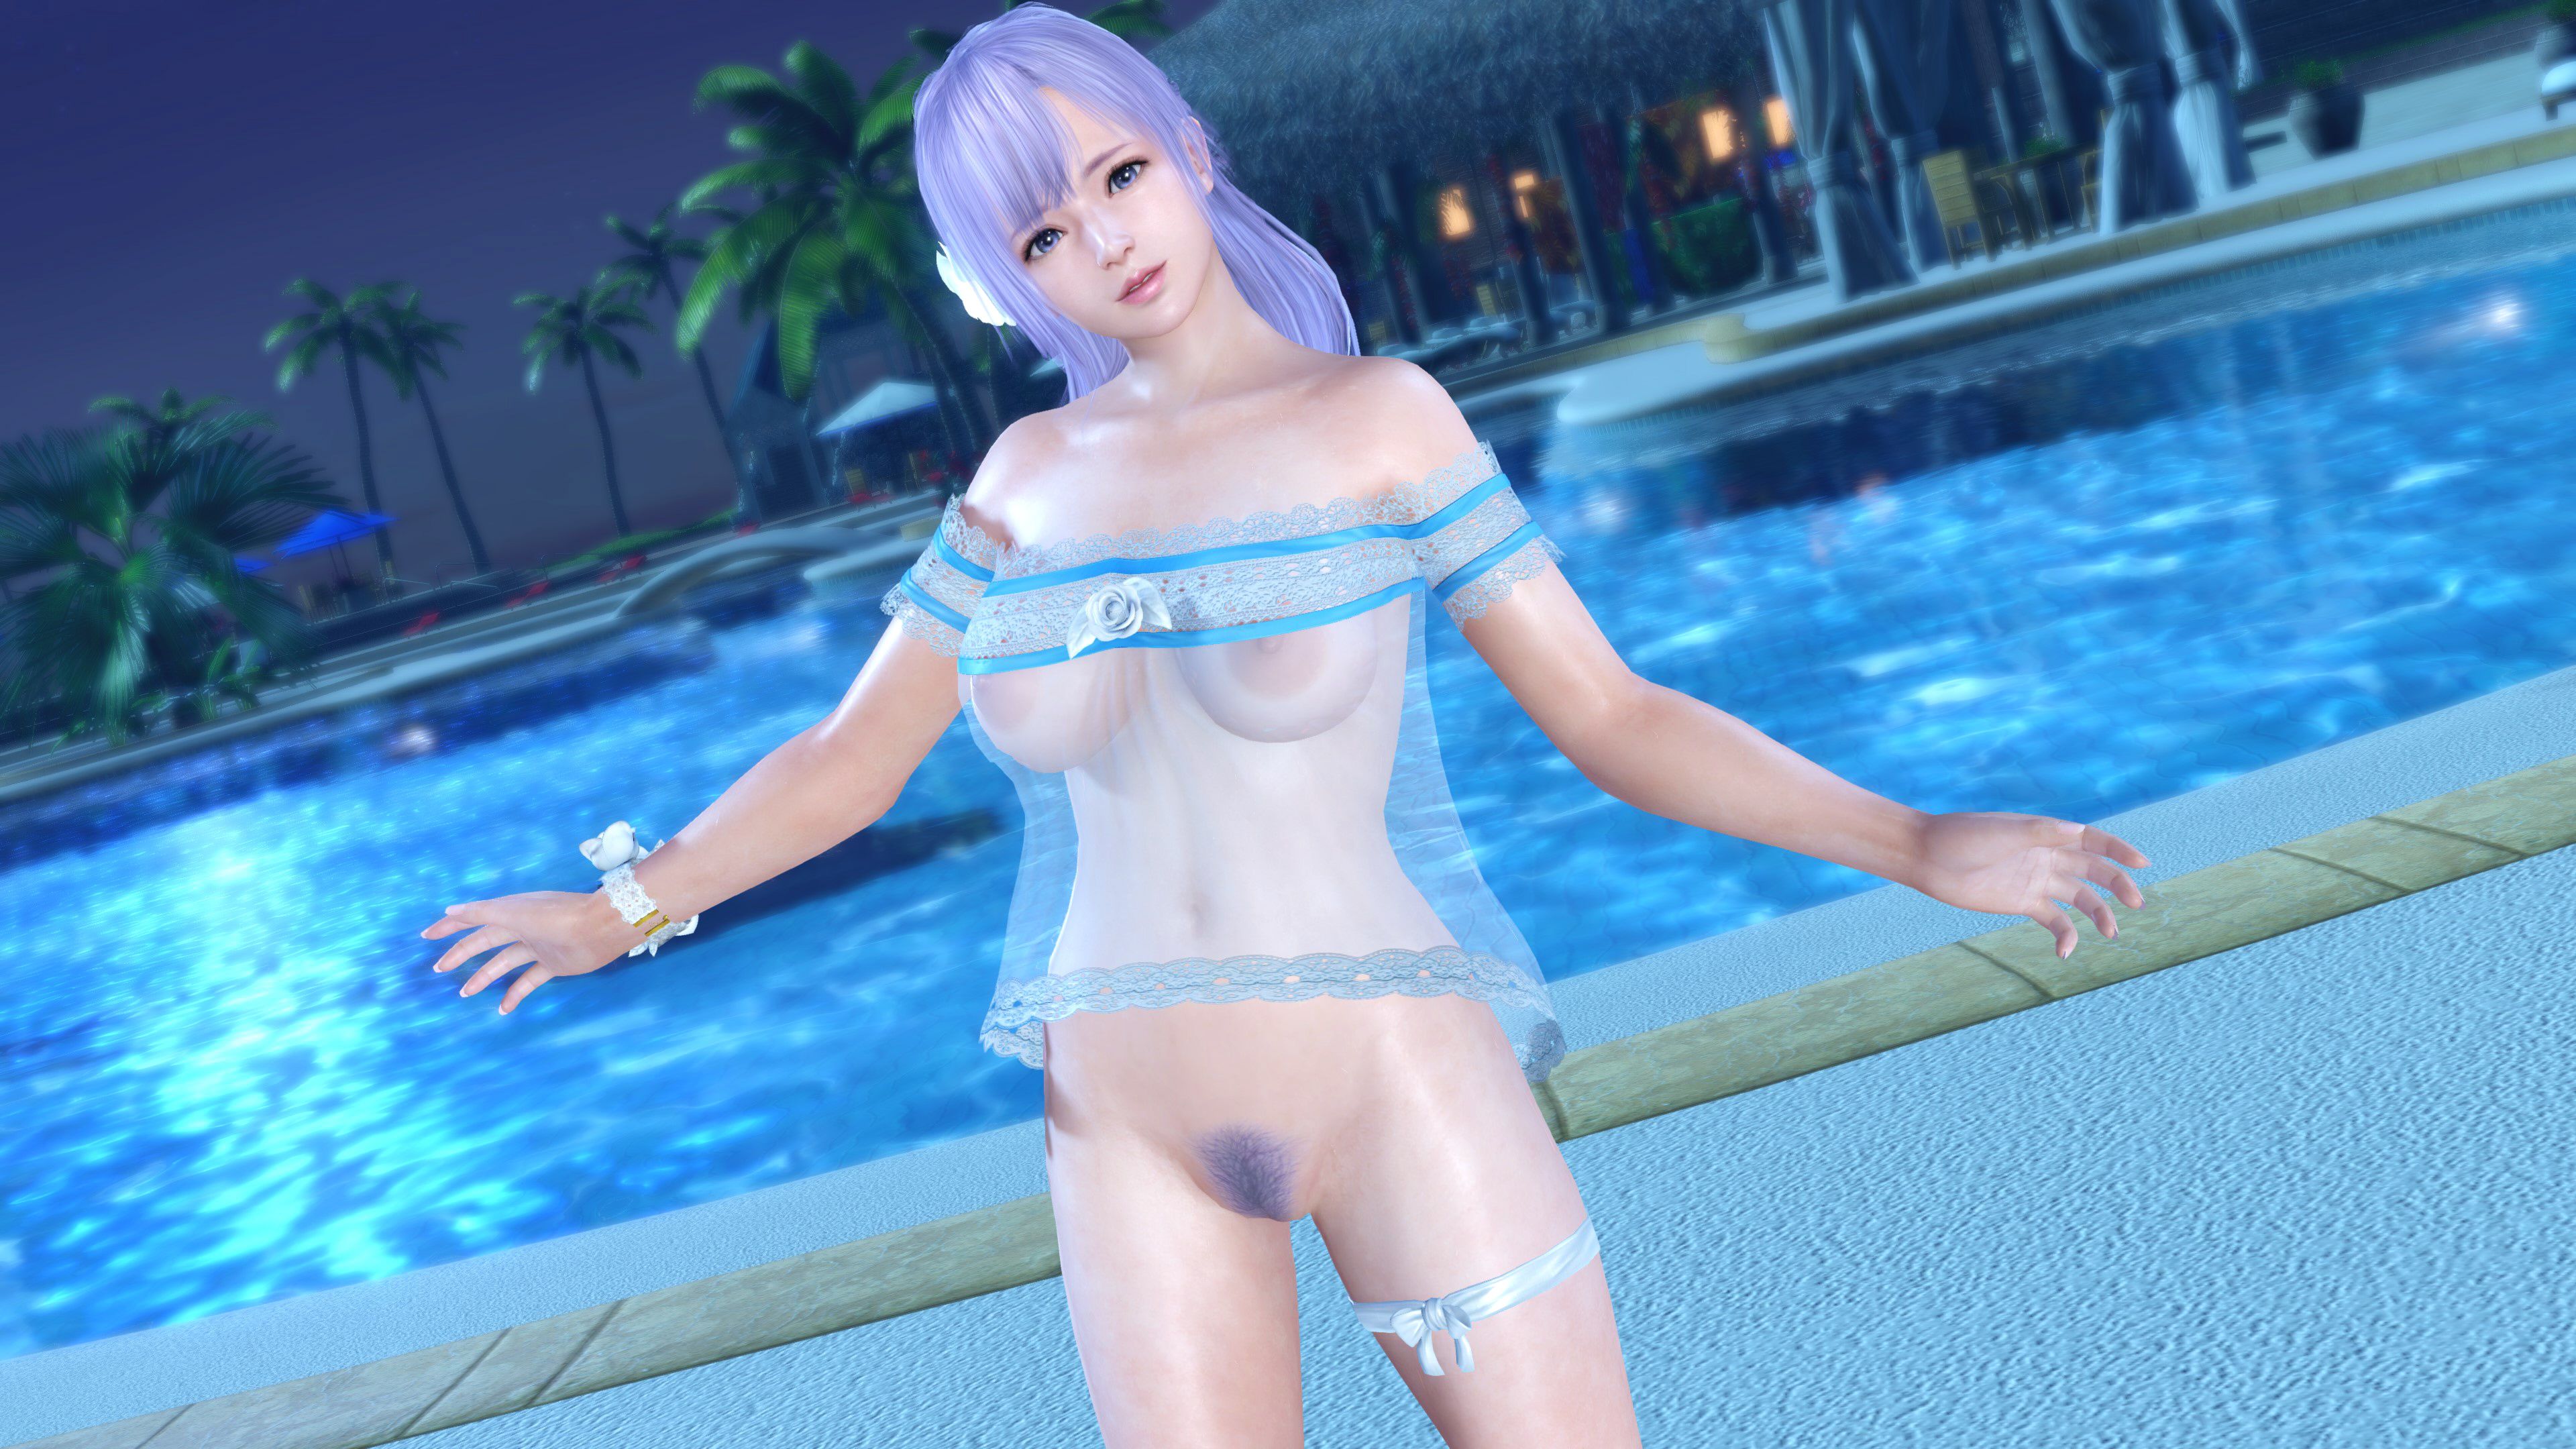 [DEAD OR ALIVE] 3D CG erotic images of DOA heroines Part 5 21